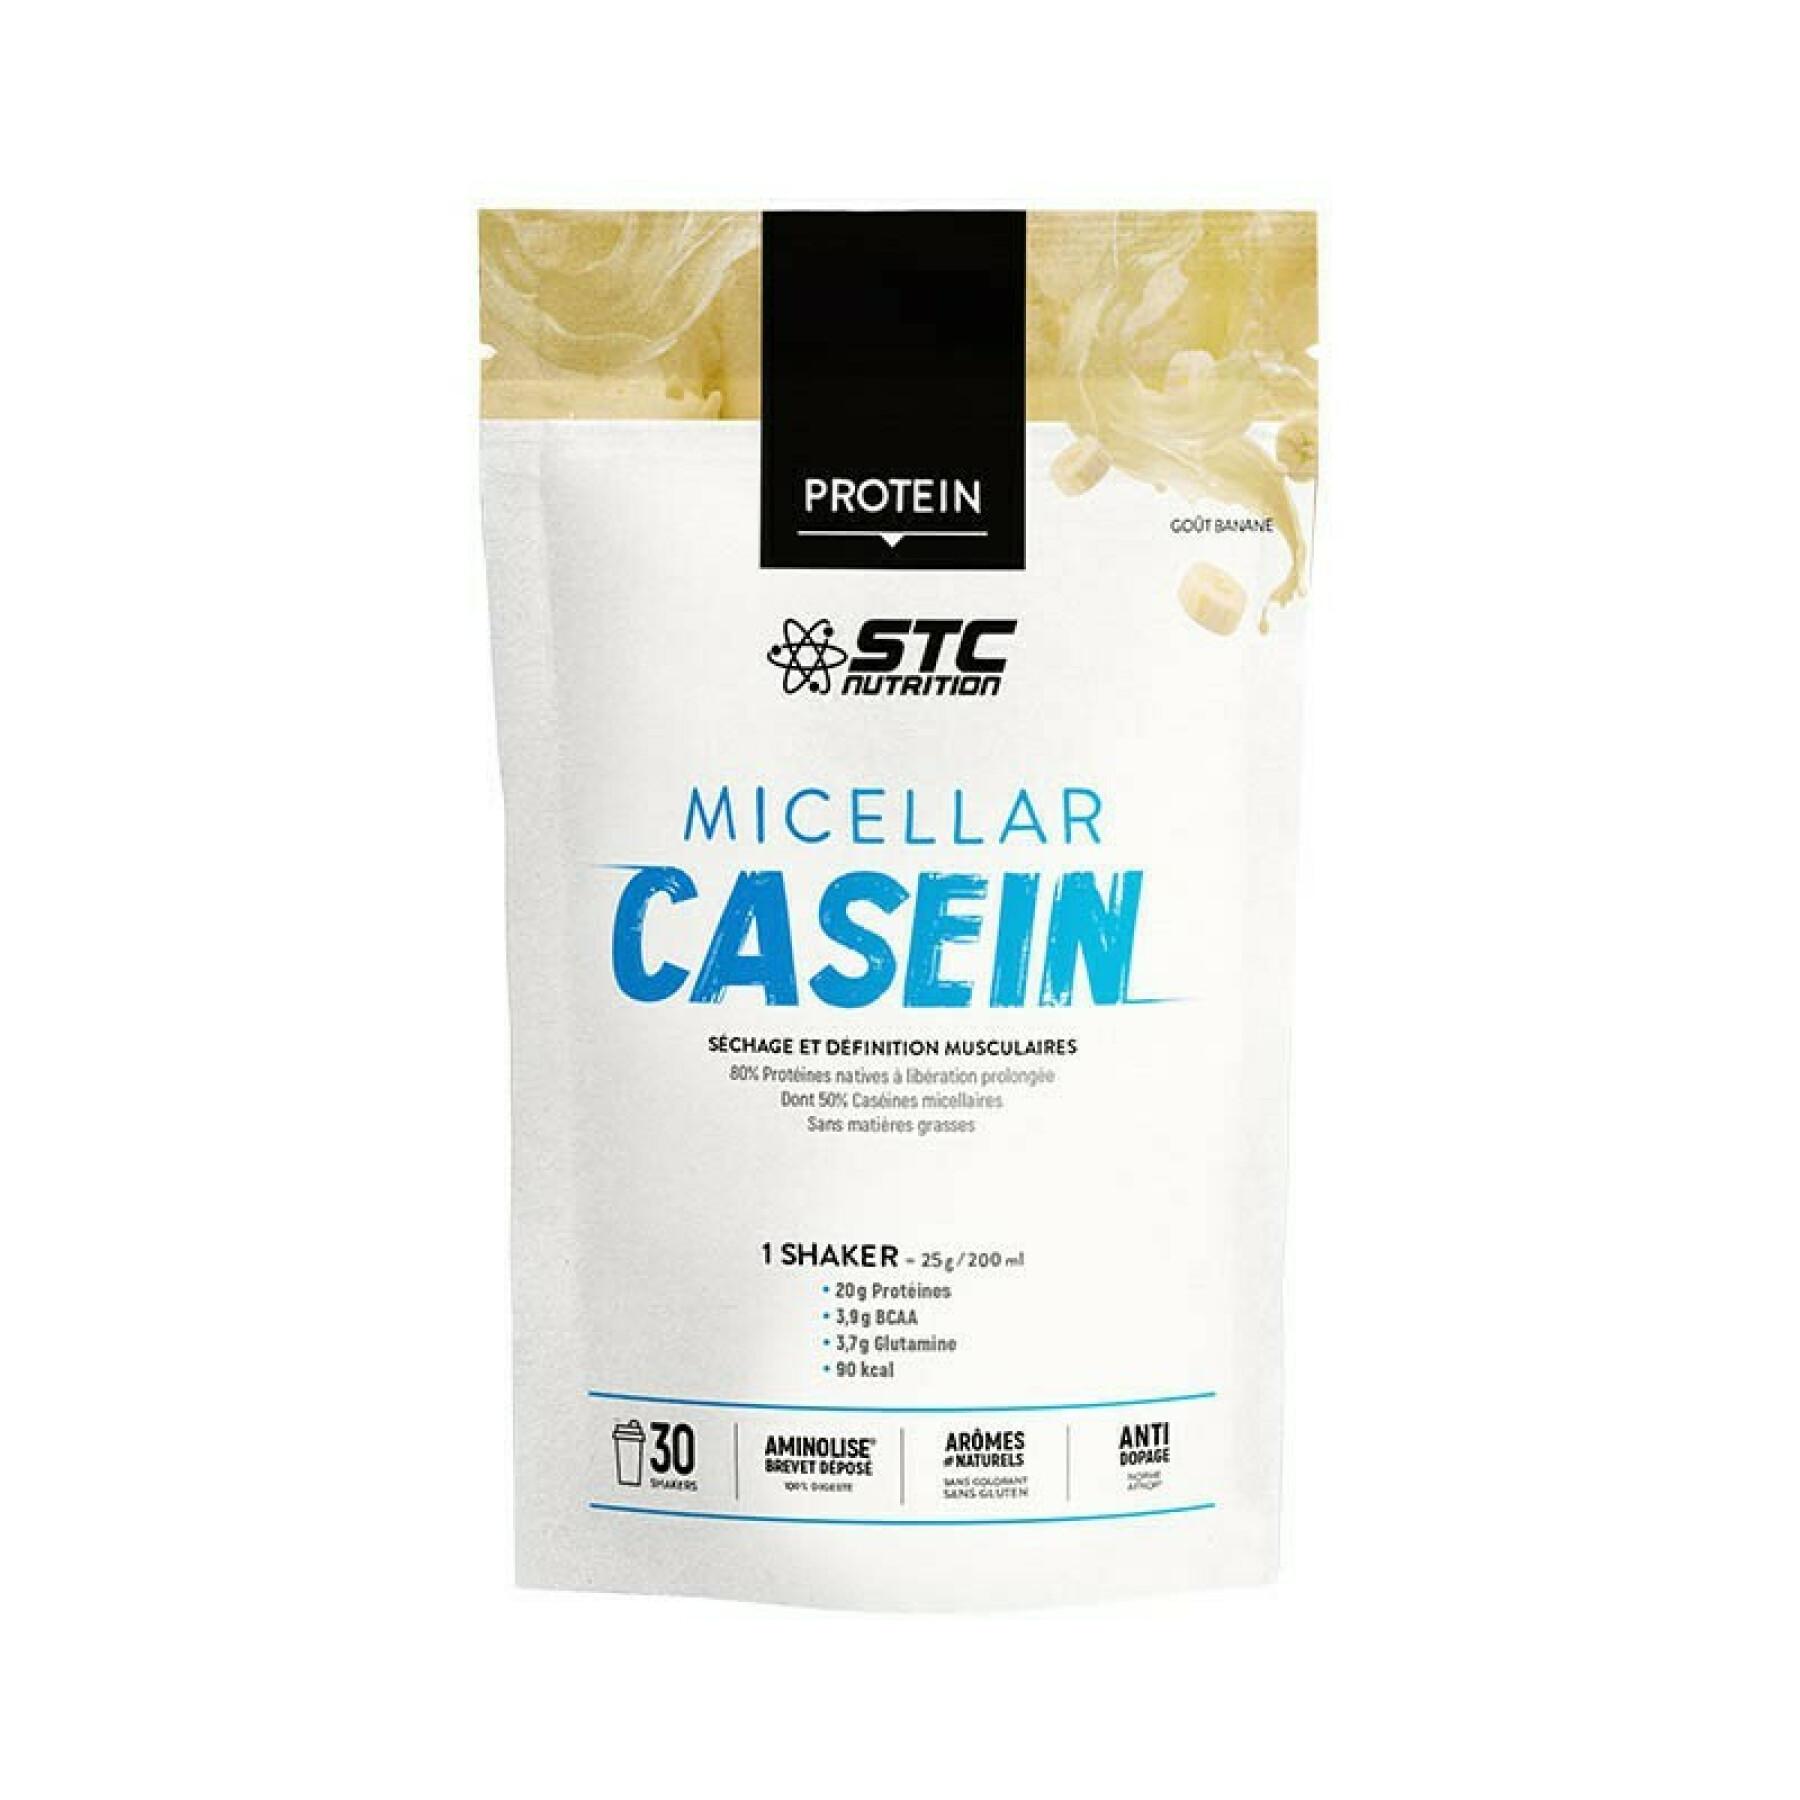 Doypack micellar casein with measuring spoon STC Nutrition vanille - 750g